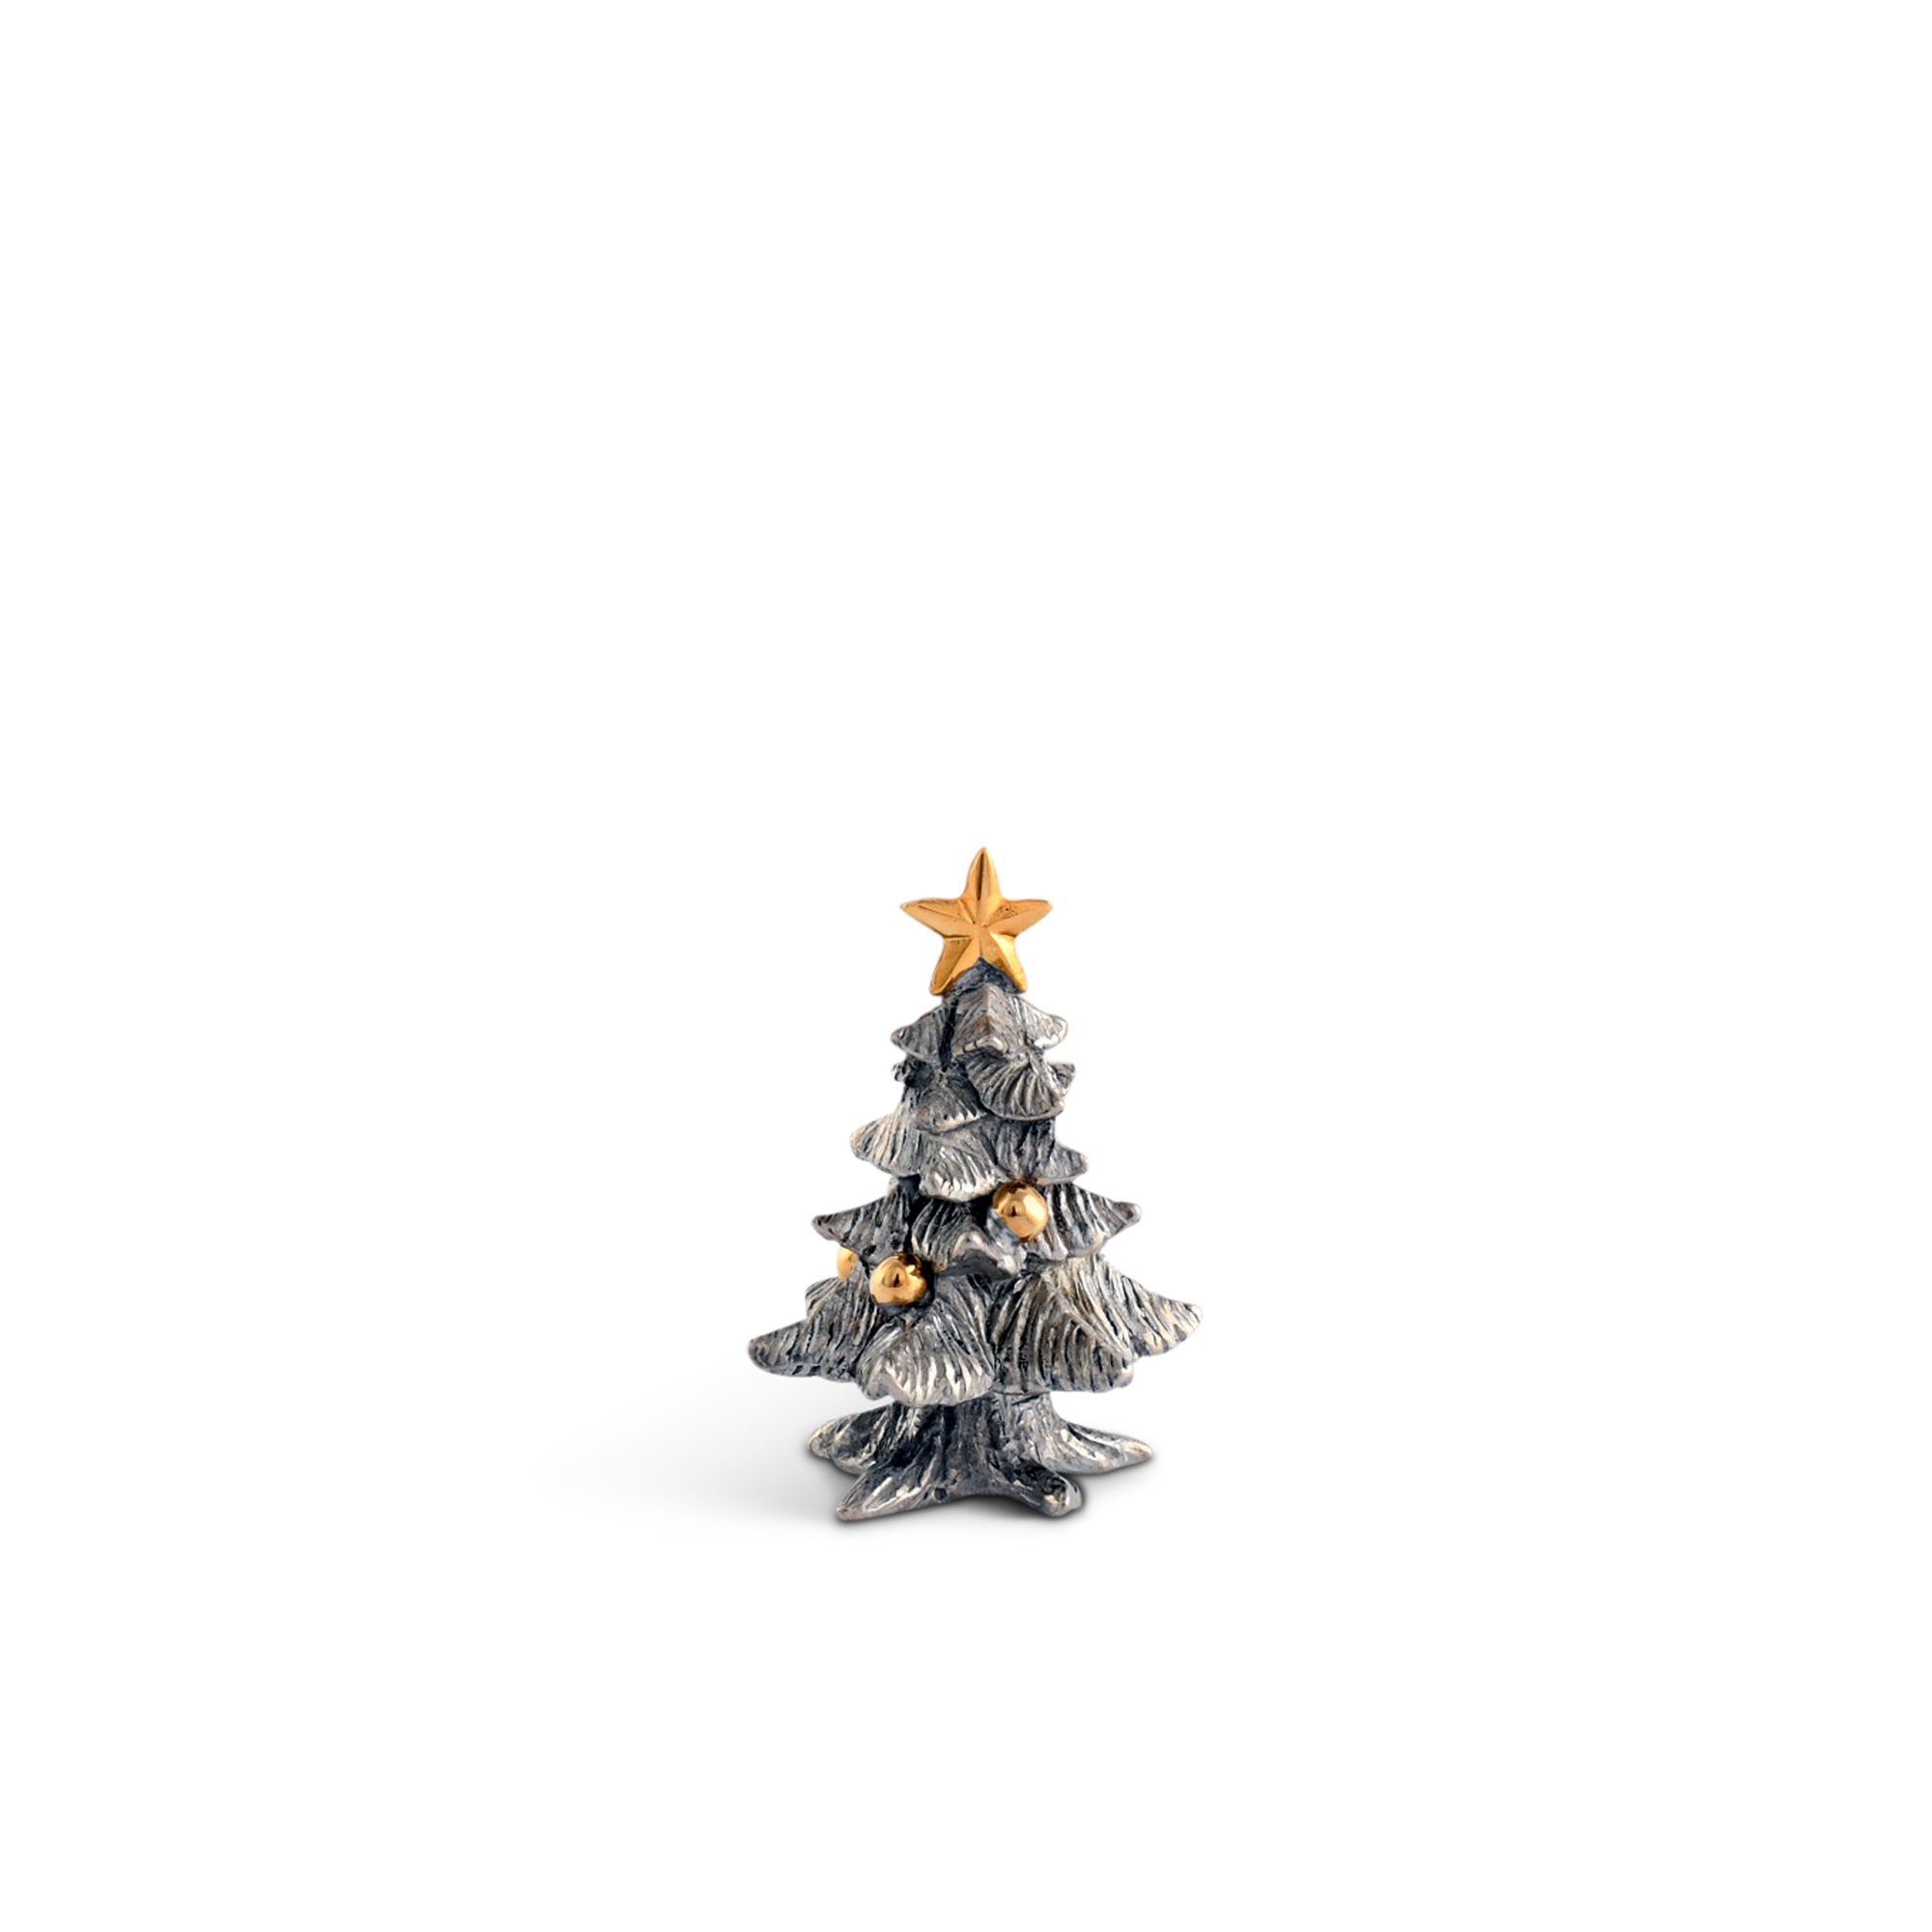 Vagabond House Chirstmas Tree Placecard Holder Product Image